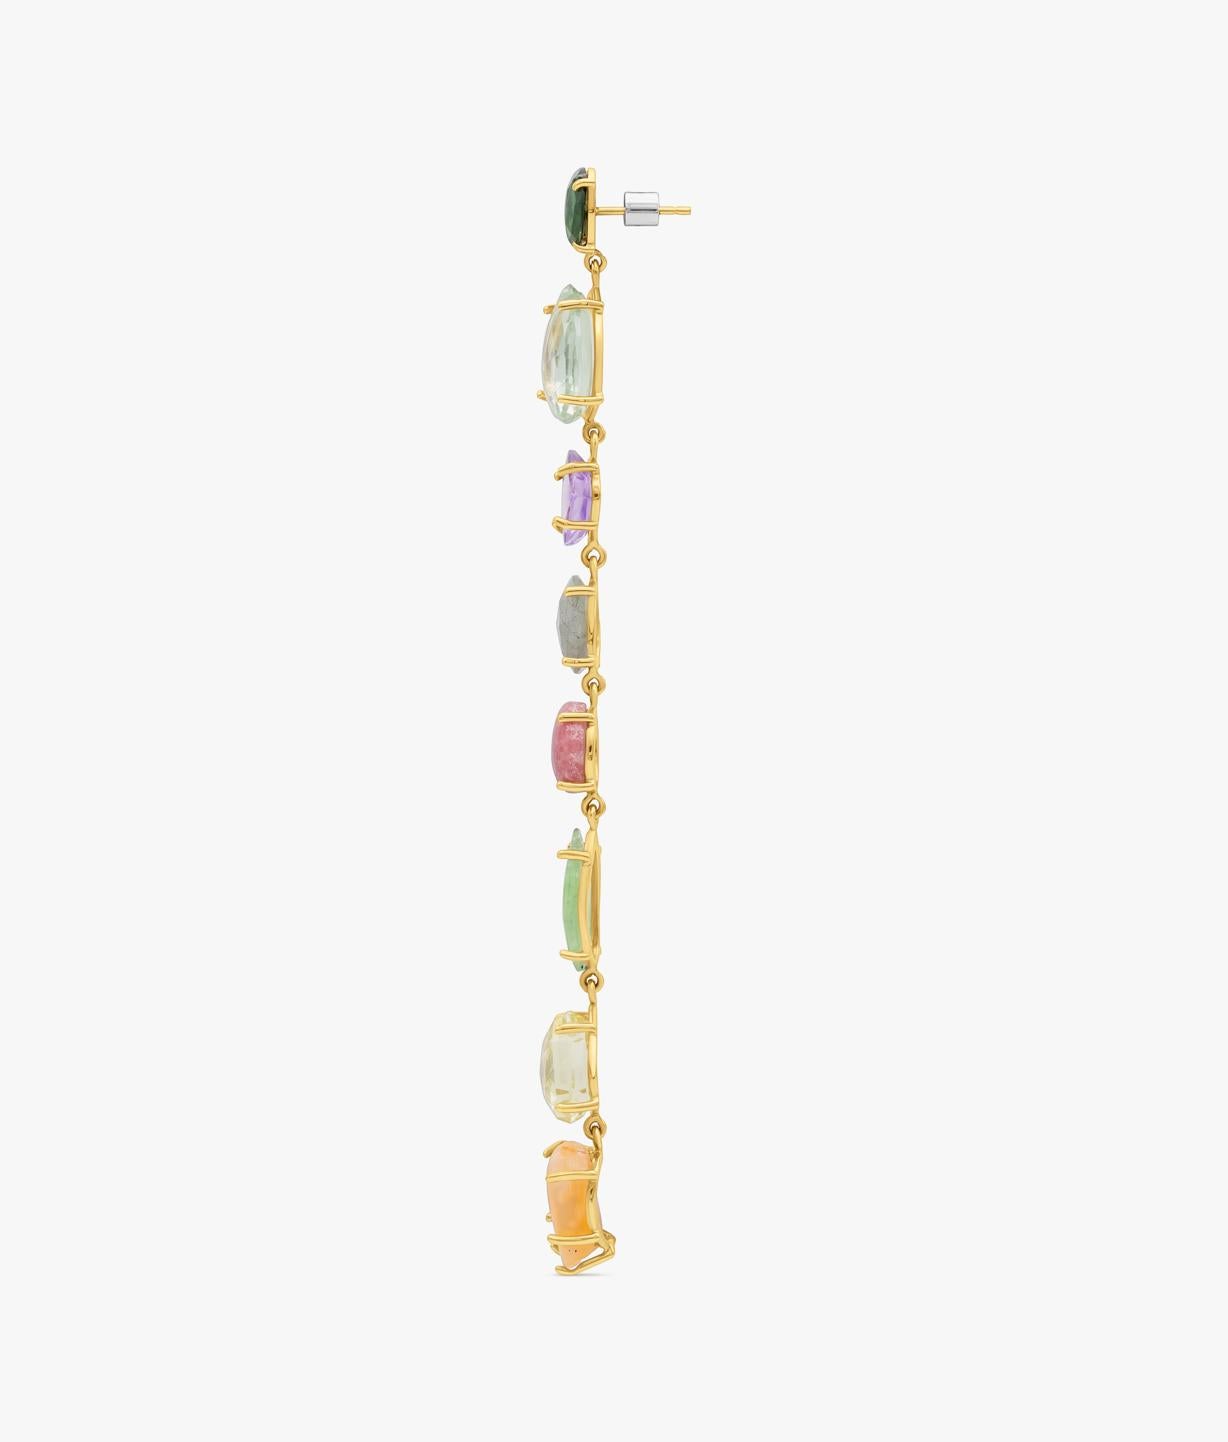 One-of-a-kind broken gems single earring. Hand-made assembled on a 14-karat gold frame, this long earring is a statement piece composed by a cascade of eight gemstones: two quartz, one fluorite, one cornelian, one peridote, one amethyst, one chrome